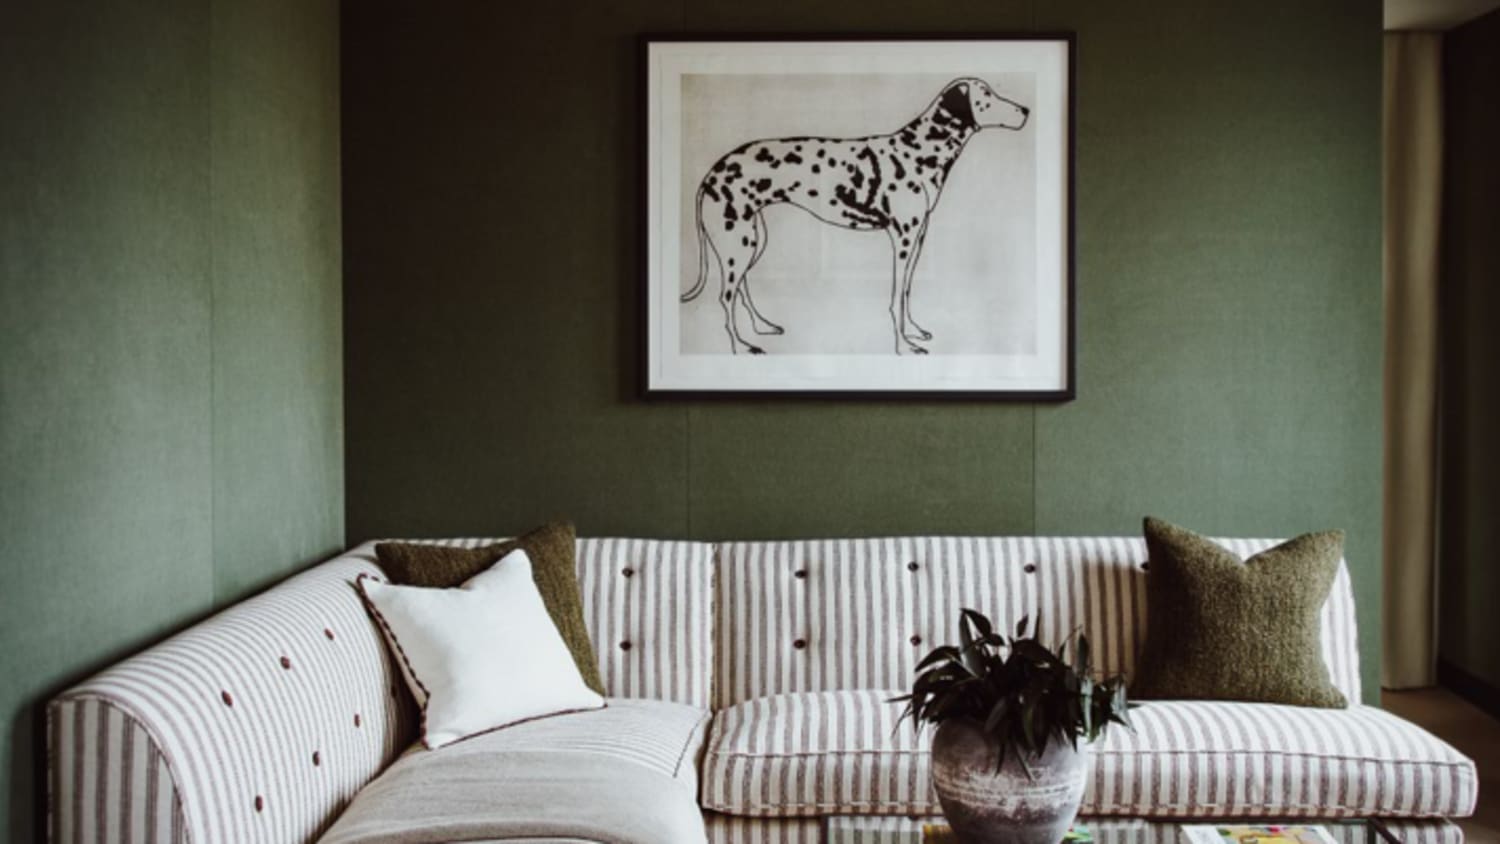 COLOR TRENDS  Olive green color in interiors and design